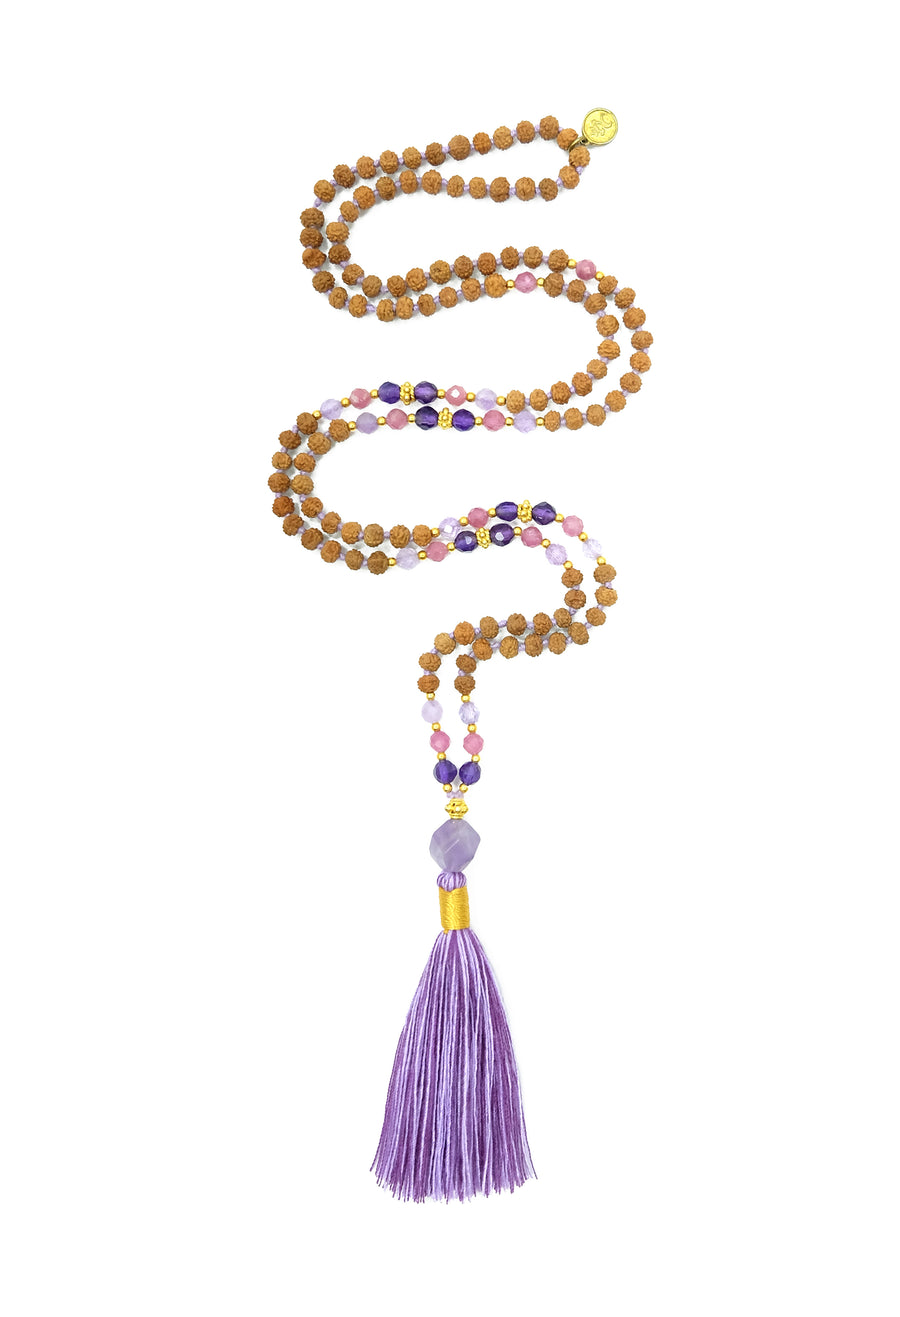 Purple Reign Mala mala necklace hand-made from rudraksha seeds, amethyst, pink tourmaline and 22k gold accents.